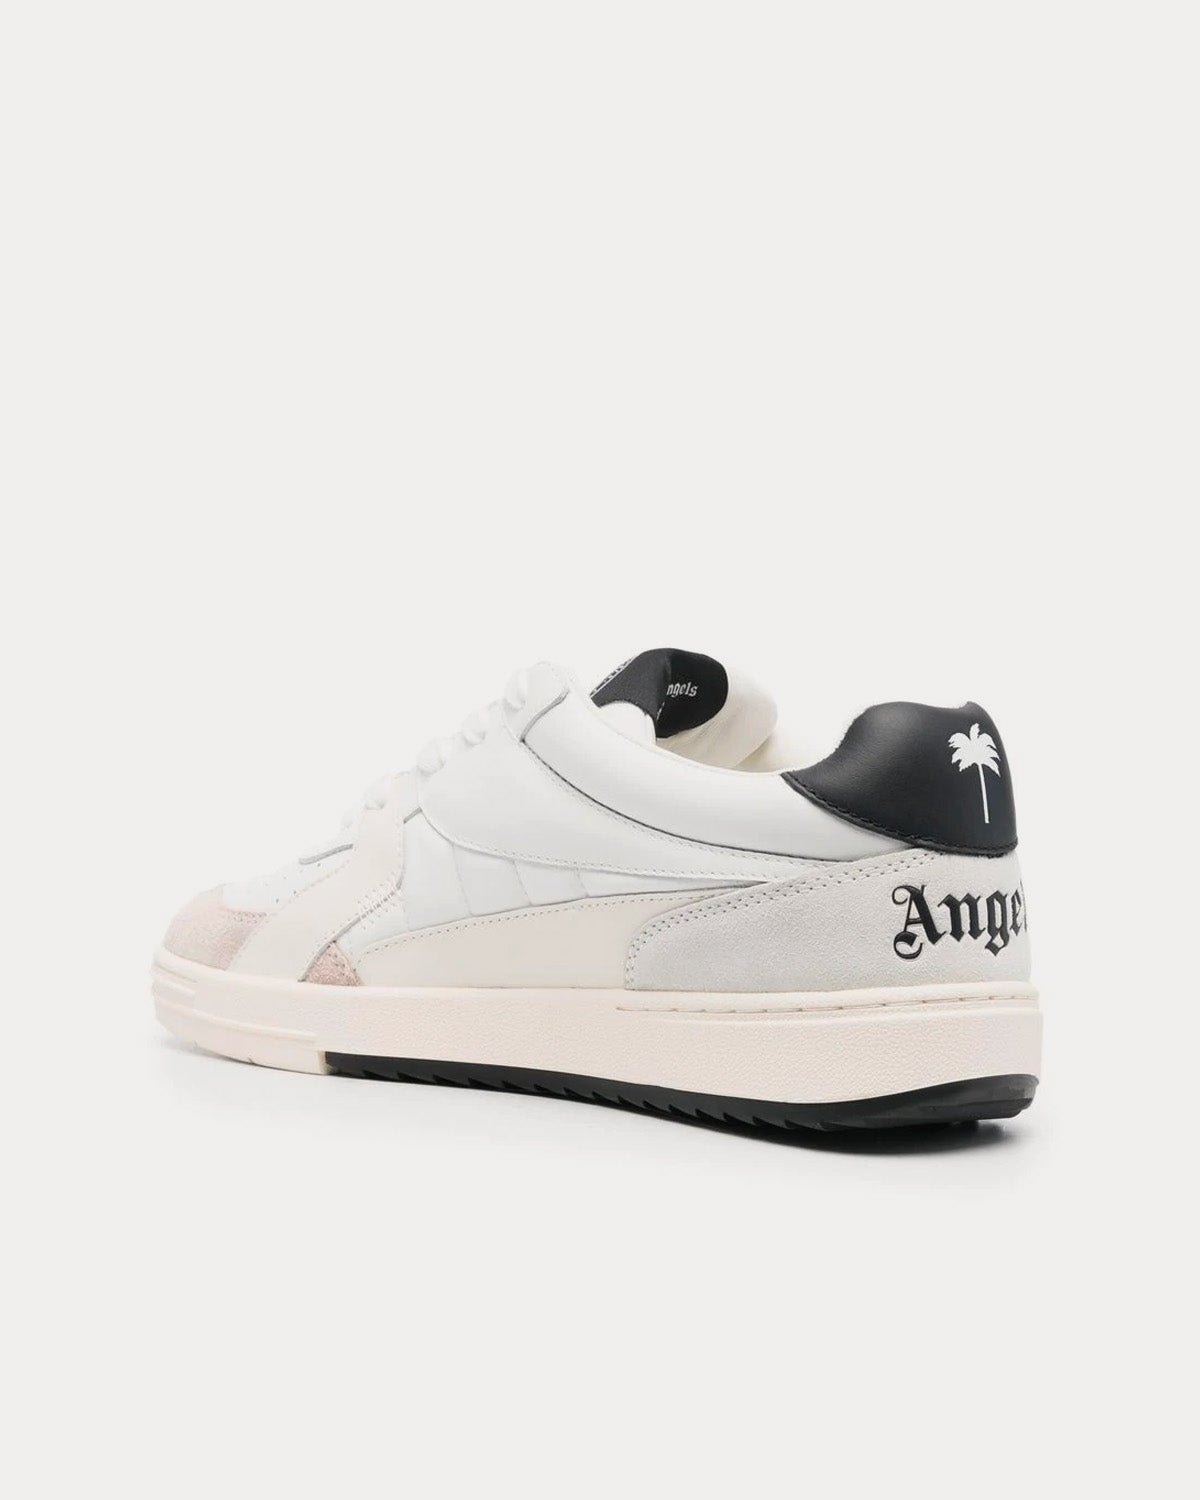 Palm Angels - University White / Black Low Top Sneakers